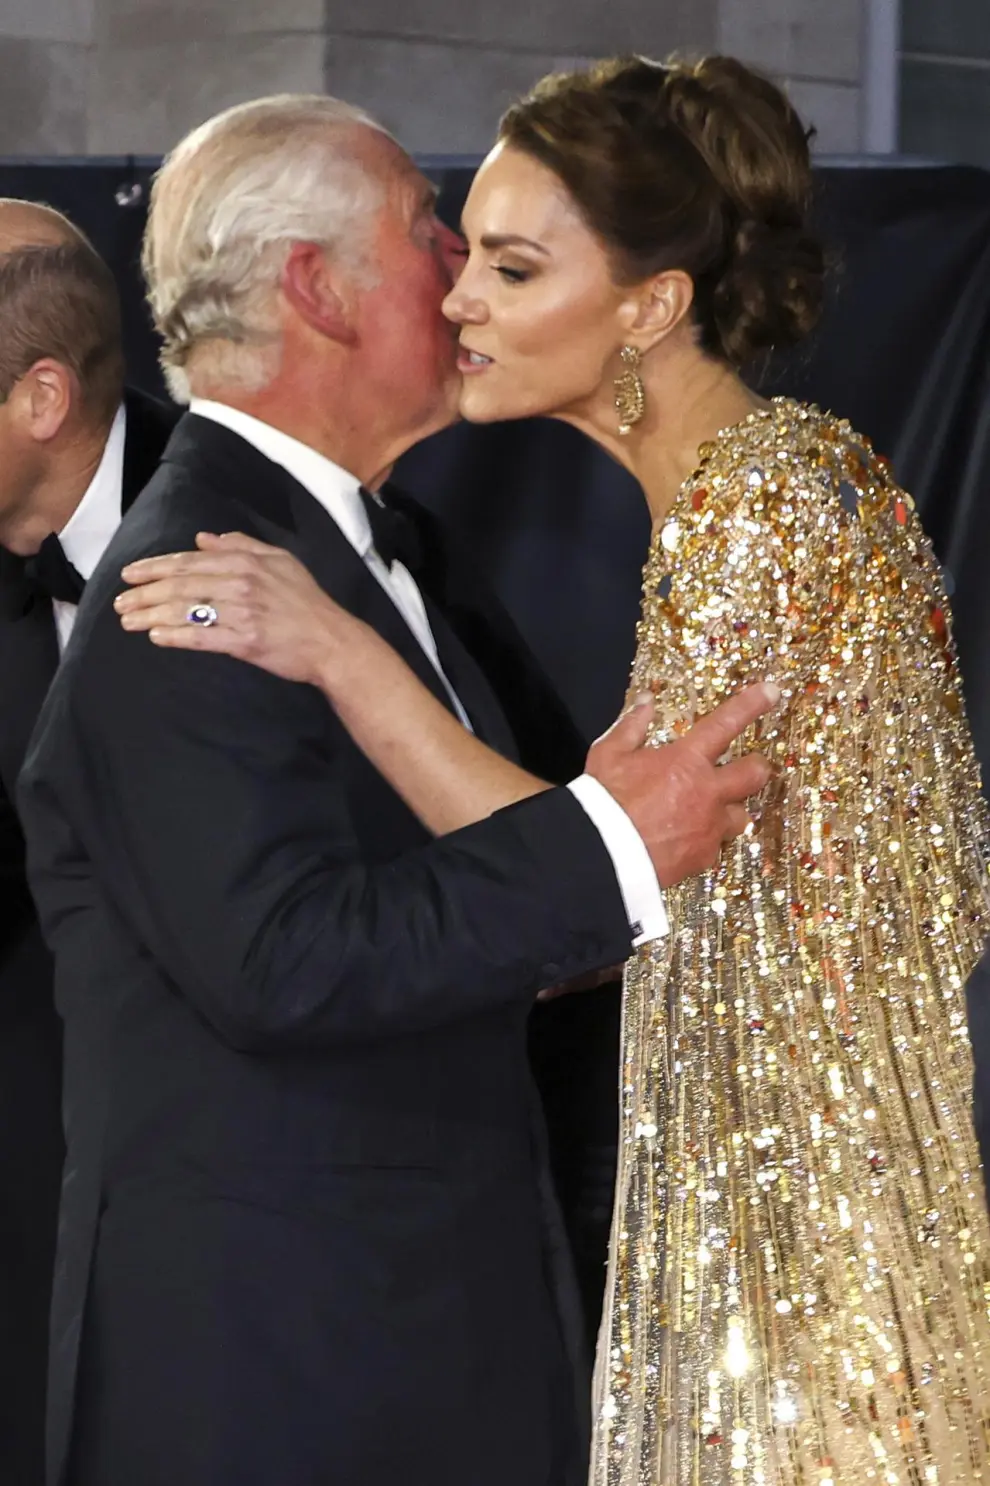 FILE - Britain's Prince Charles, left, reacts with Kate, the Duchess of Cambridge as they arrive for the World premiere of the new film from the James Bond franchise 'No Time To Die', in London Tuesday, Sept. 28, 2021. (Chris Jackson/Pool Photo via AP, File)